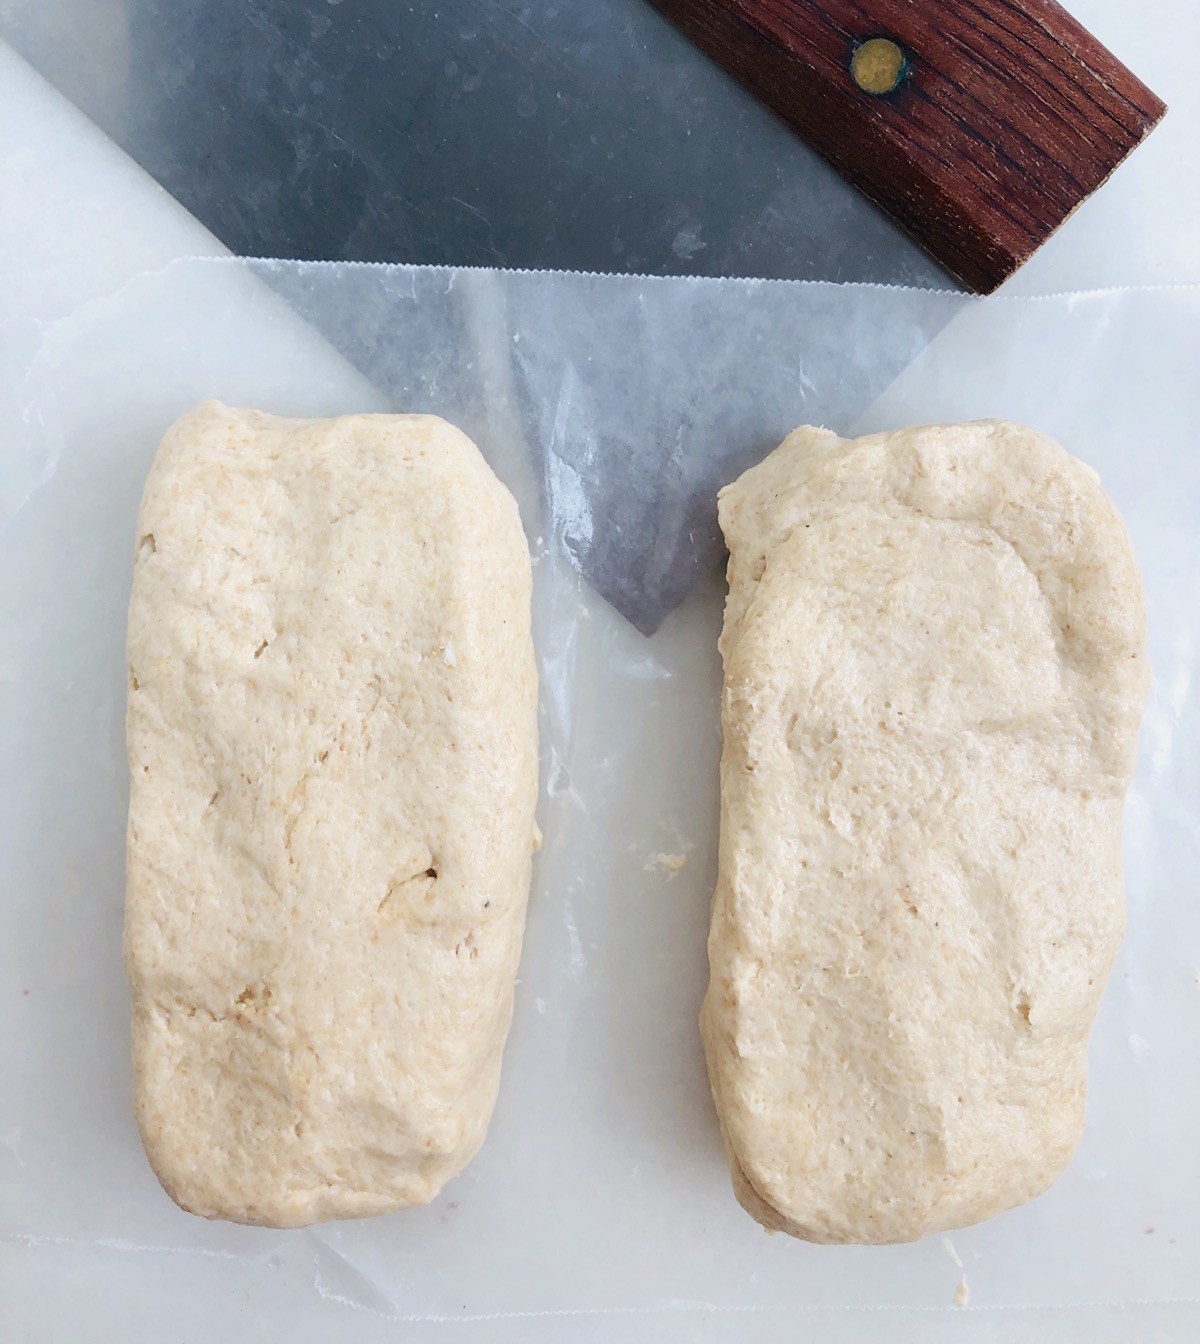 Dough for sourdough crackers cut in half and shaped into rectangles